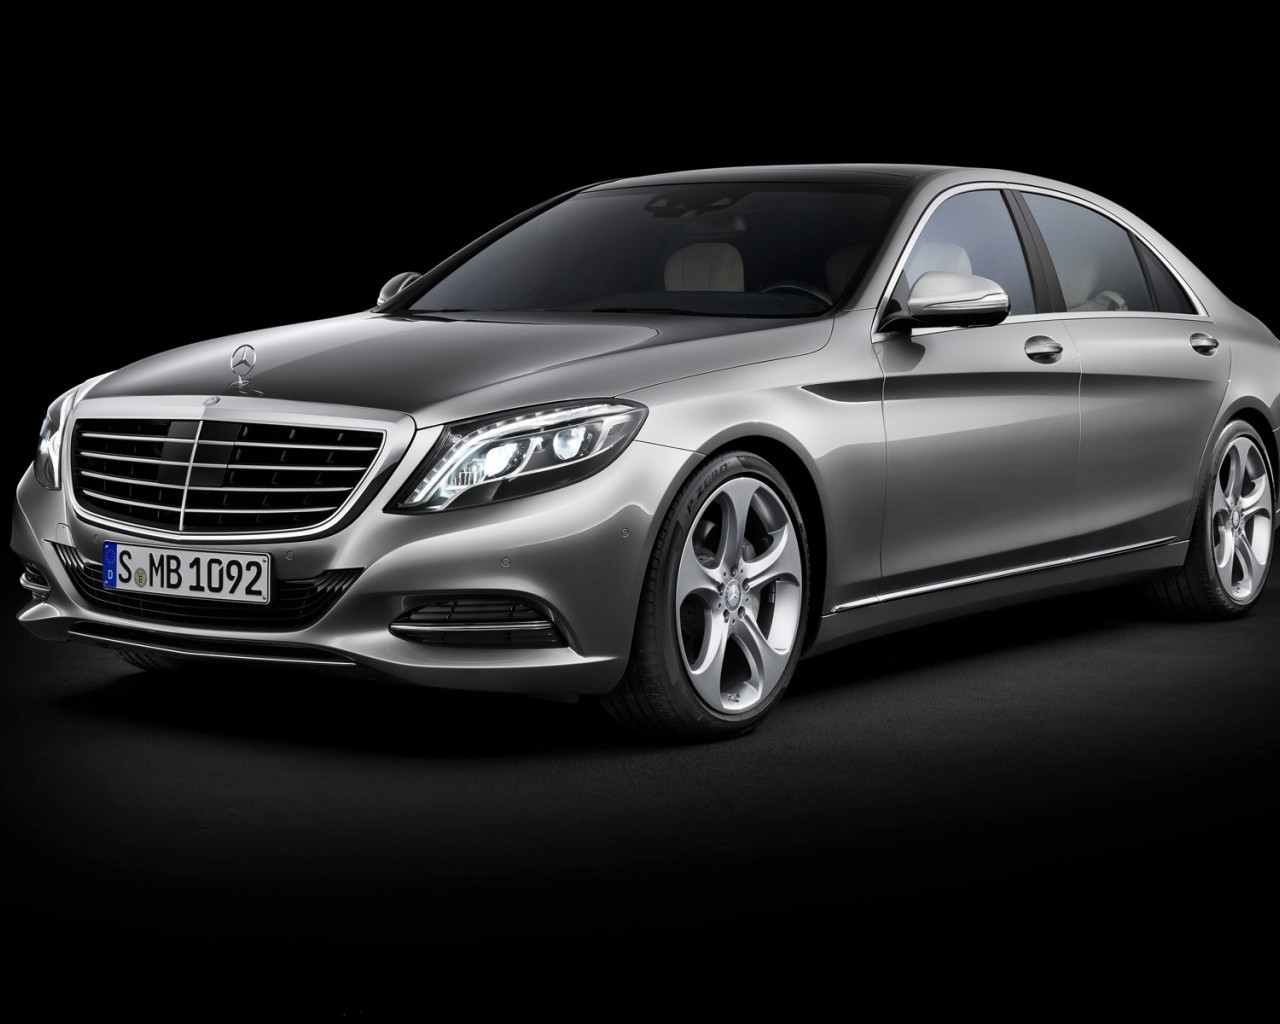 New Mercedes S Class for 1280 x 1024 resolution